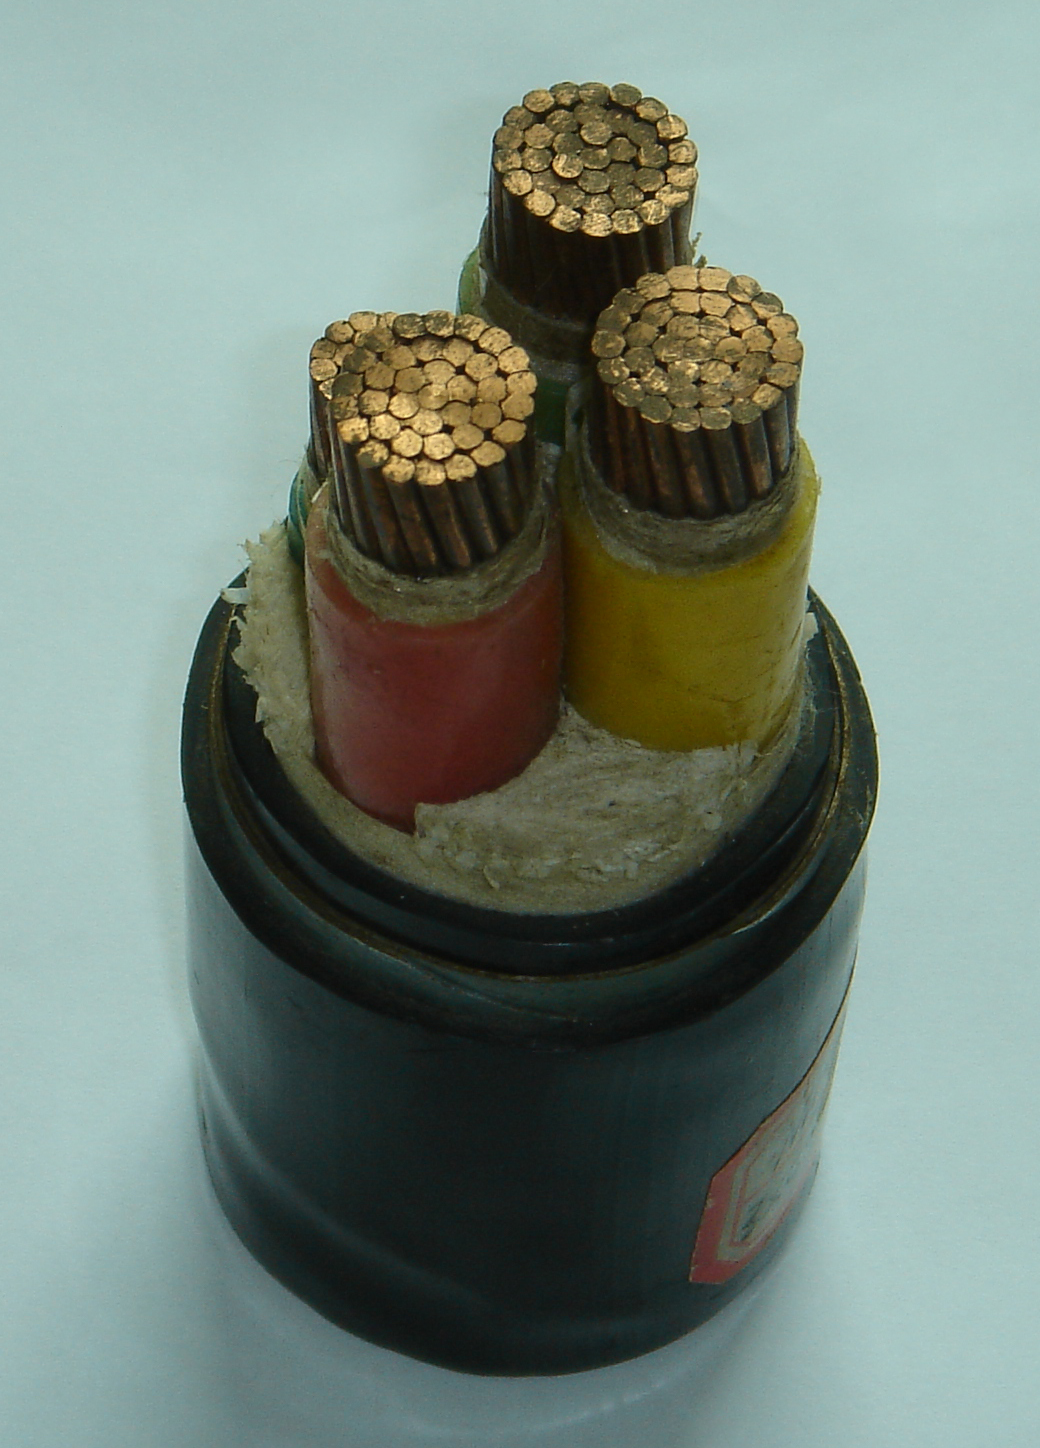 35 KV Or Lower XLPE Insulation Power Cable